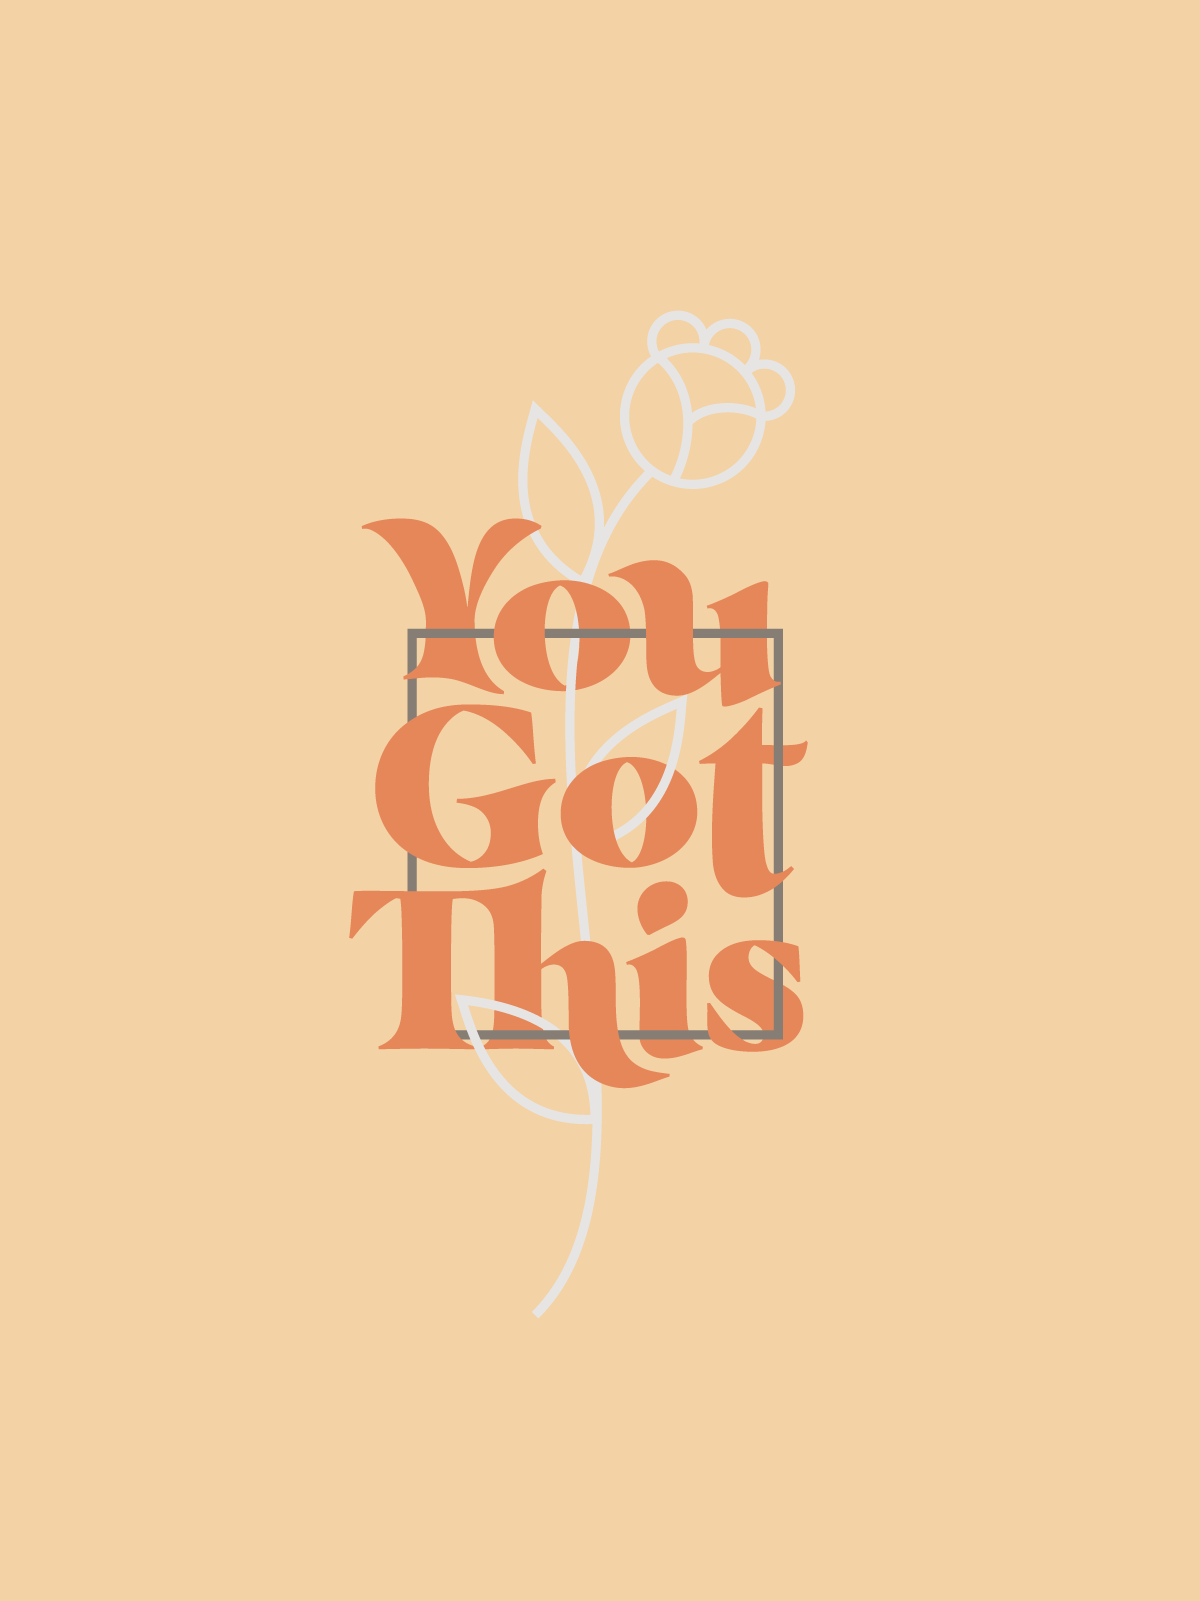 Colours Cafe Challenge 01 - You Got This by Sam Gable on Dribbble